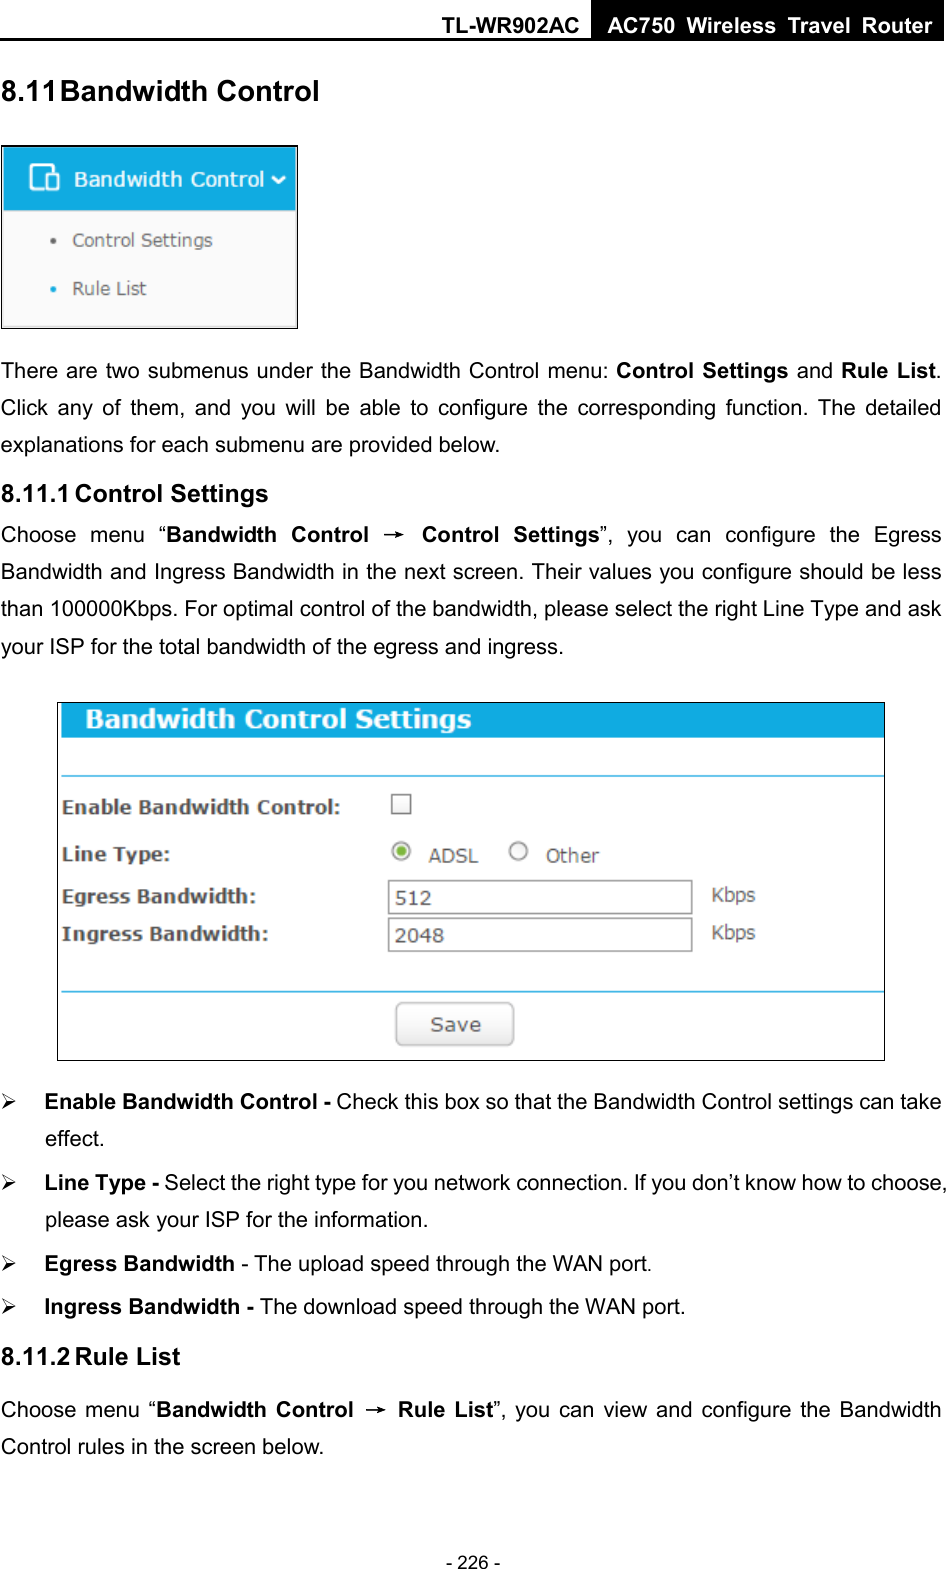 TL-WR902AC AC750  Wireless Travel Router  - 226 - 8.11 Bandwidth Control  There are two submenus under the Bandwidth Control menu: Control Settings and Rule List. Click any of them, and you will be able to configure the corresponding function. The detailed explanations for each submenu are provided below. 8.11.1 Control Settings Choose menu “Bandwidth Control → Control Settings”, you can configure the Egress Bandwidth and Ingress Bandwidth in the next screen. Their values you configure should be less than 100000Kbps. For optimal control of the bandwidth, please select the right Line Type and ask your ISP for the total bandwidth of the egress and ingress.   Enable Bandwidth Control - Check this box so that the Bandwidth Control settings can take effect.  Line Type - Select the right type for you network connection. If you don’t know how to choose, please ask your ISP for the information.  Egress Bandwidth - The upload speed through the WAN port.  Ingress Bandwidth - The download speed through the WAN port. 8.11.2 Rule List Choose menu “Bandwidth Control → Rule List”, you can view and configure the Bandwidth Control rules in the screen below. 